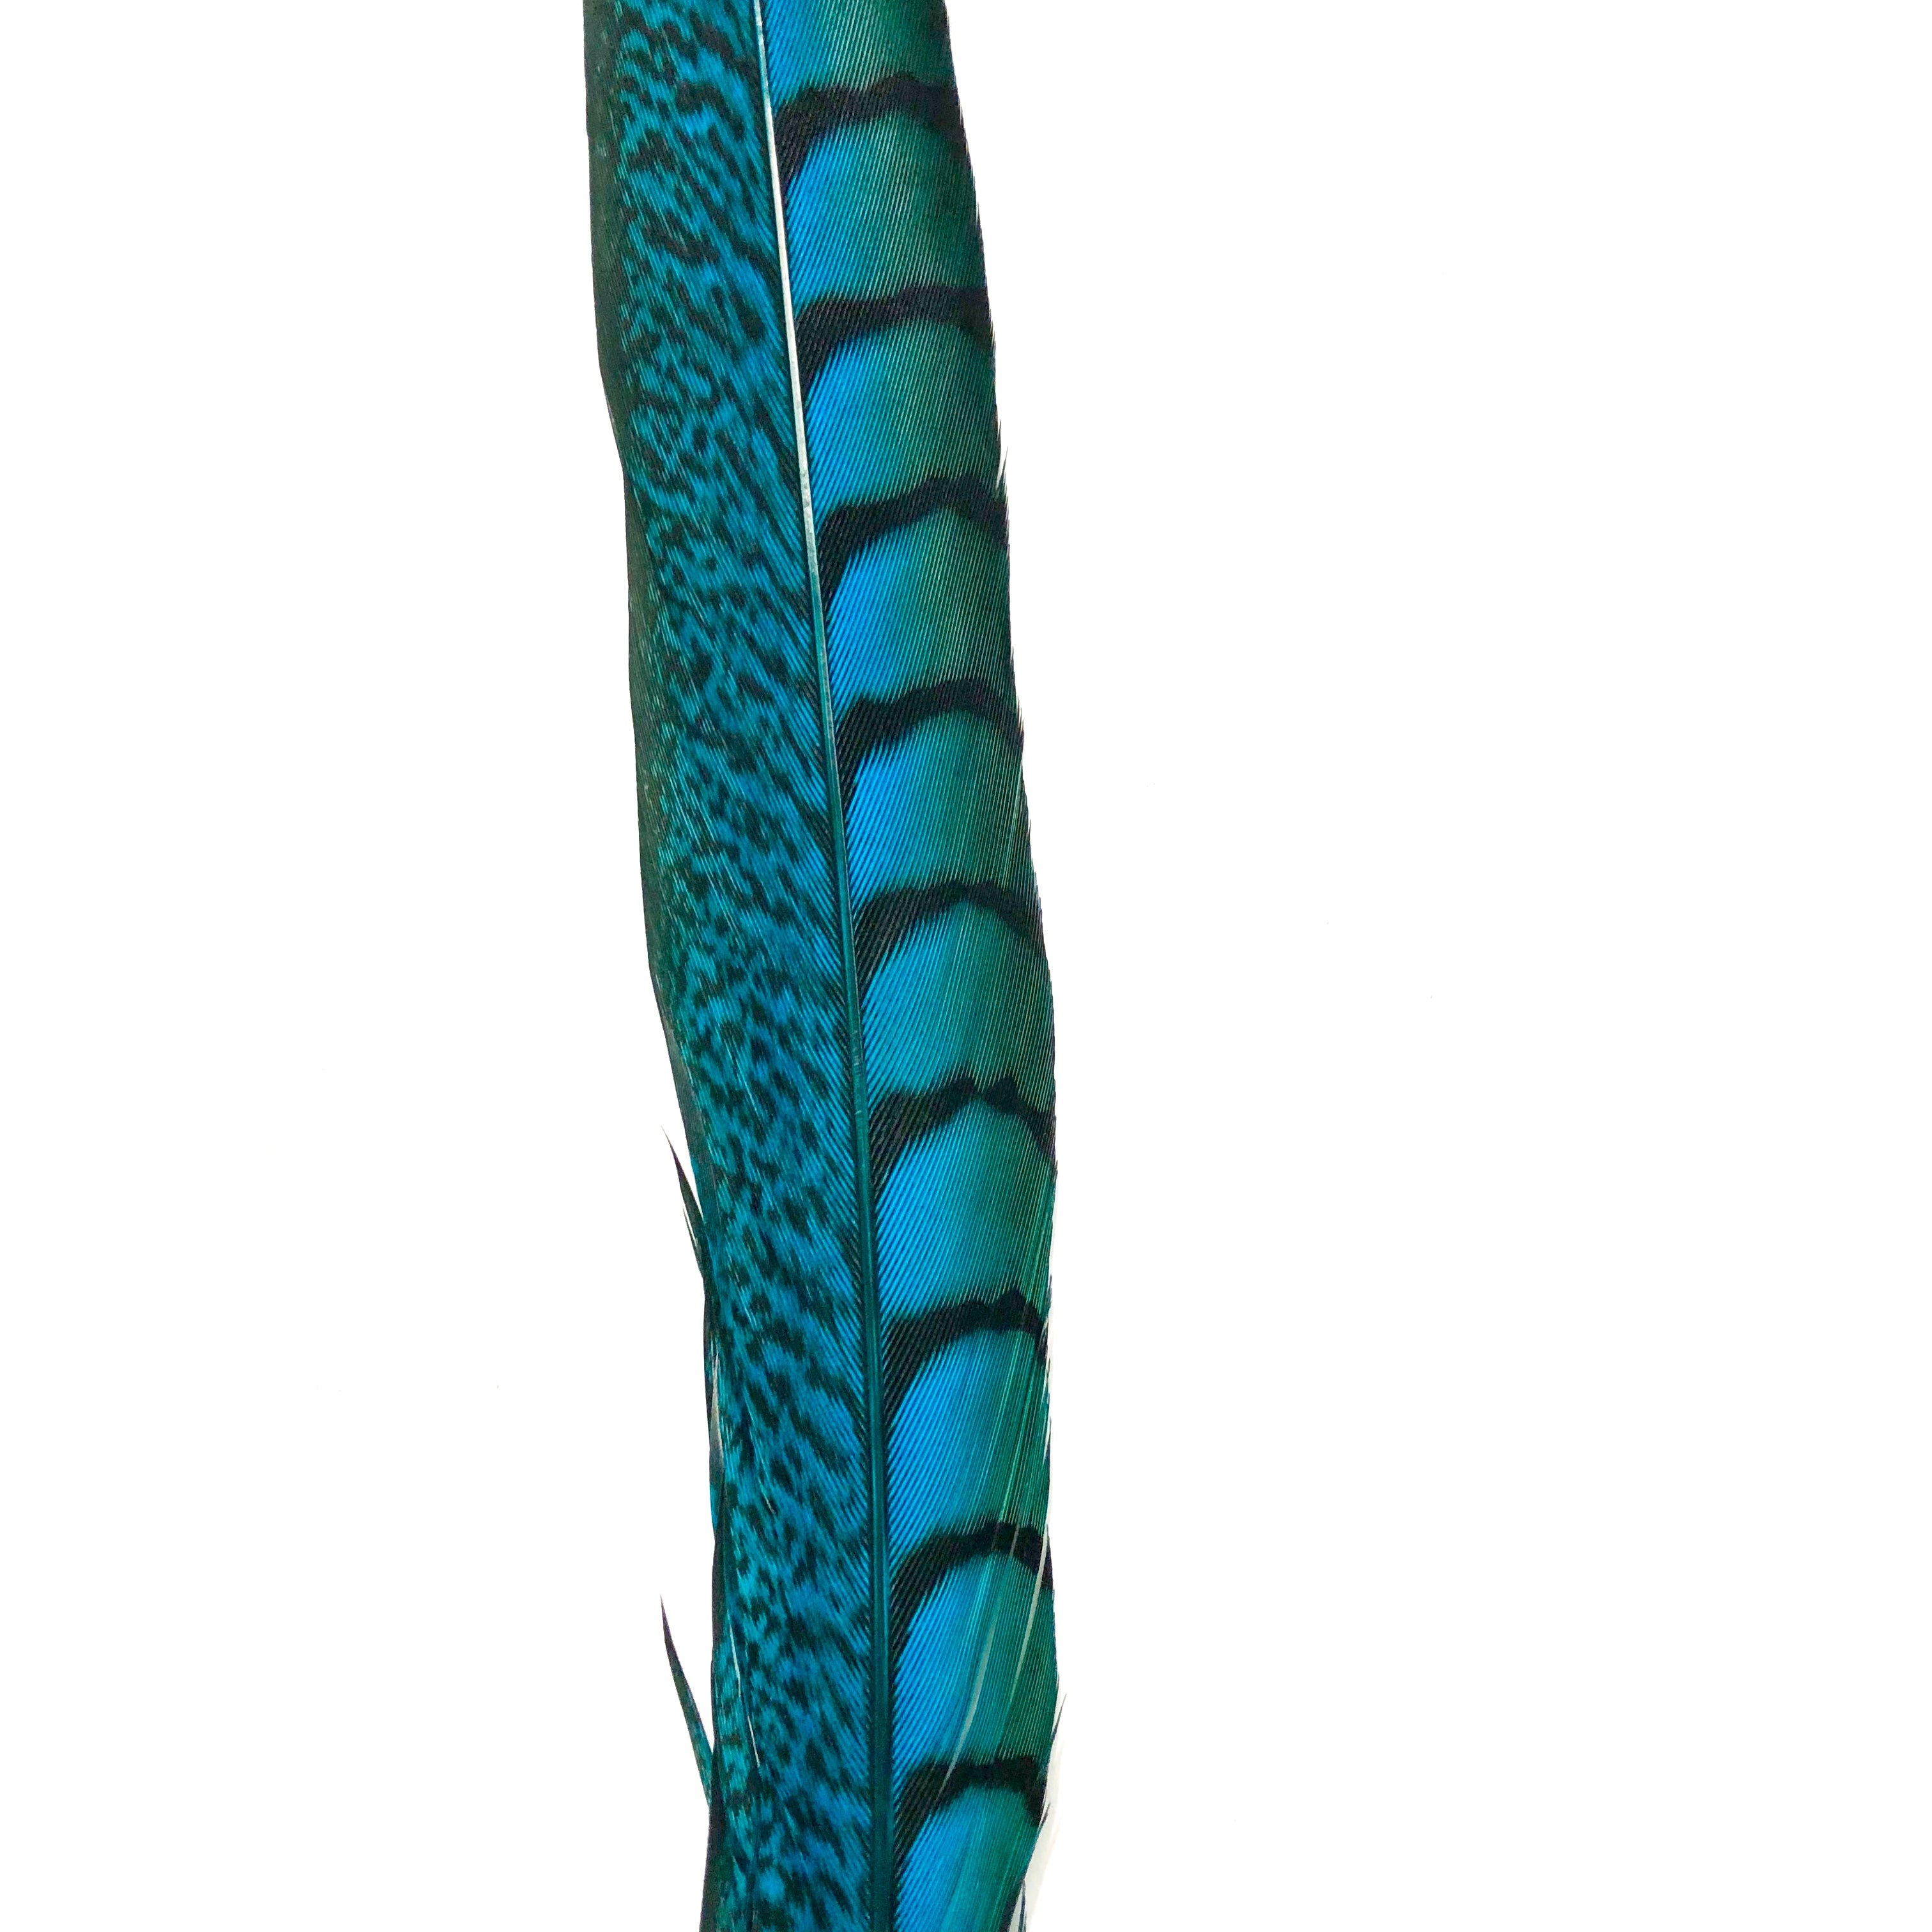 20" to 30" Lady Amherst Pheasant Side Tail Feather - Turquoise ((SECONDS))